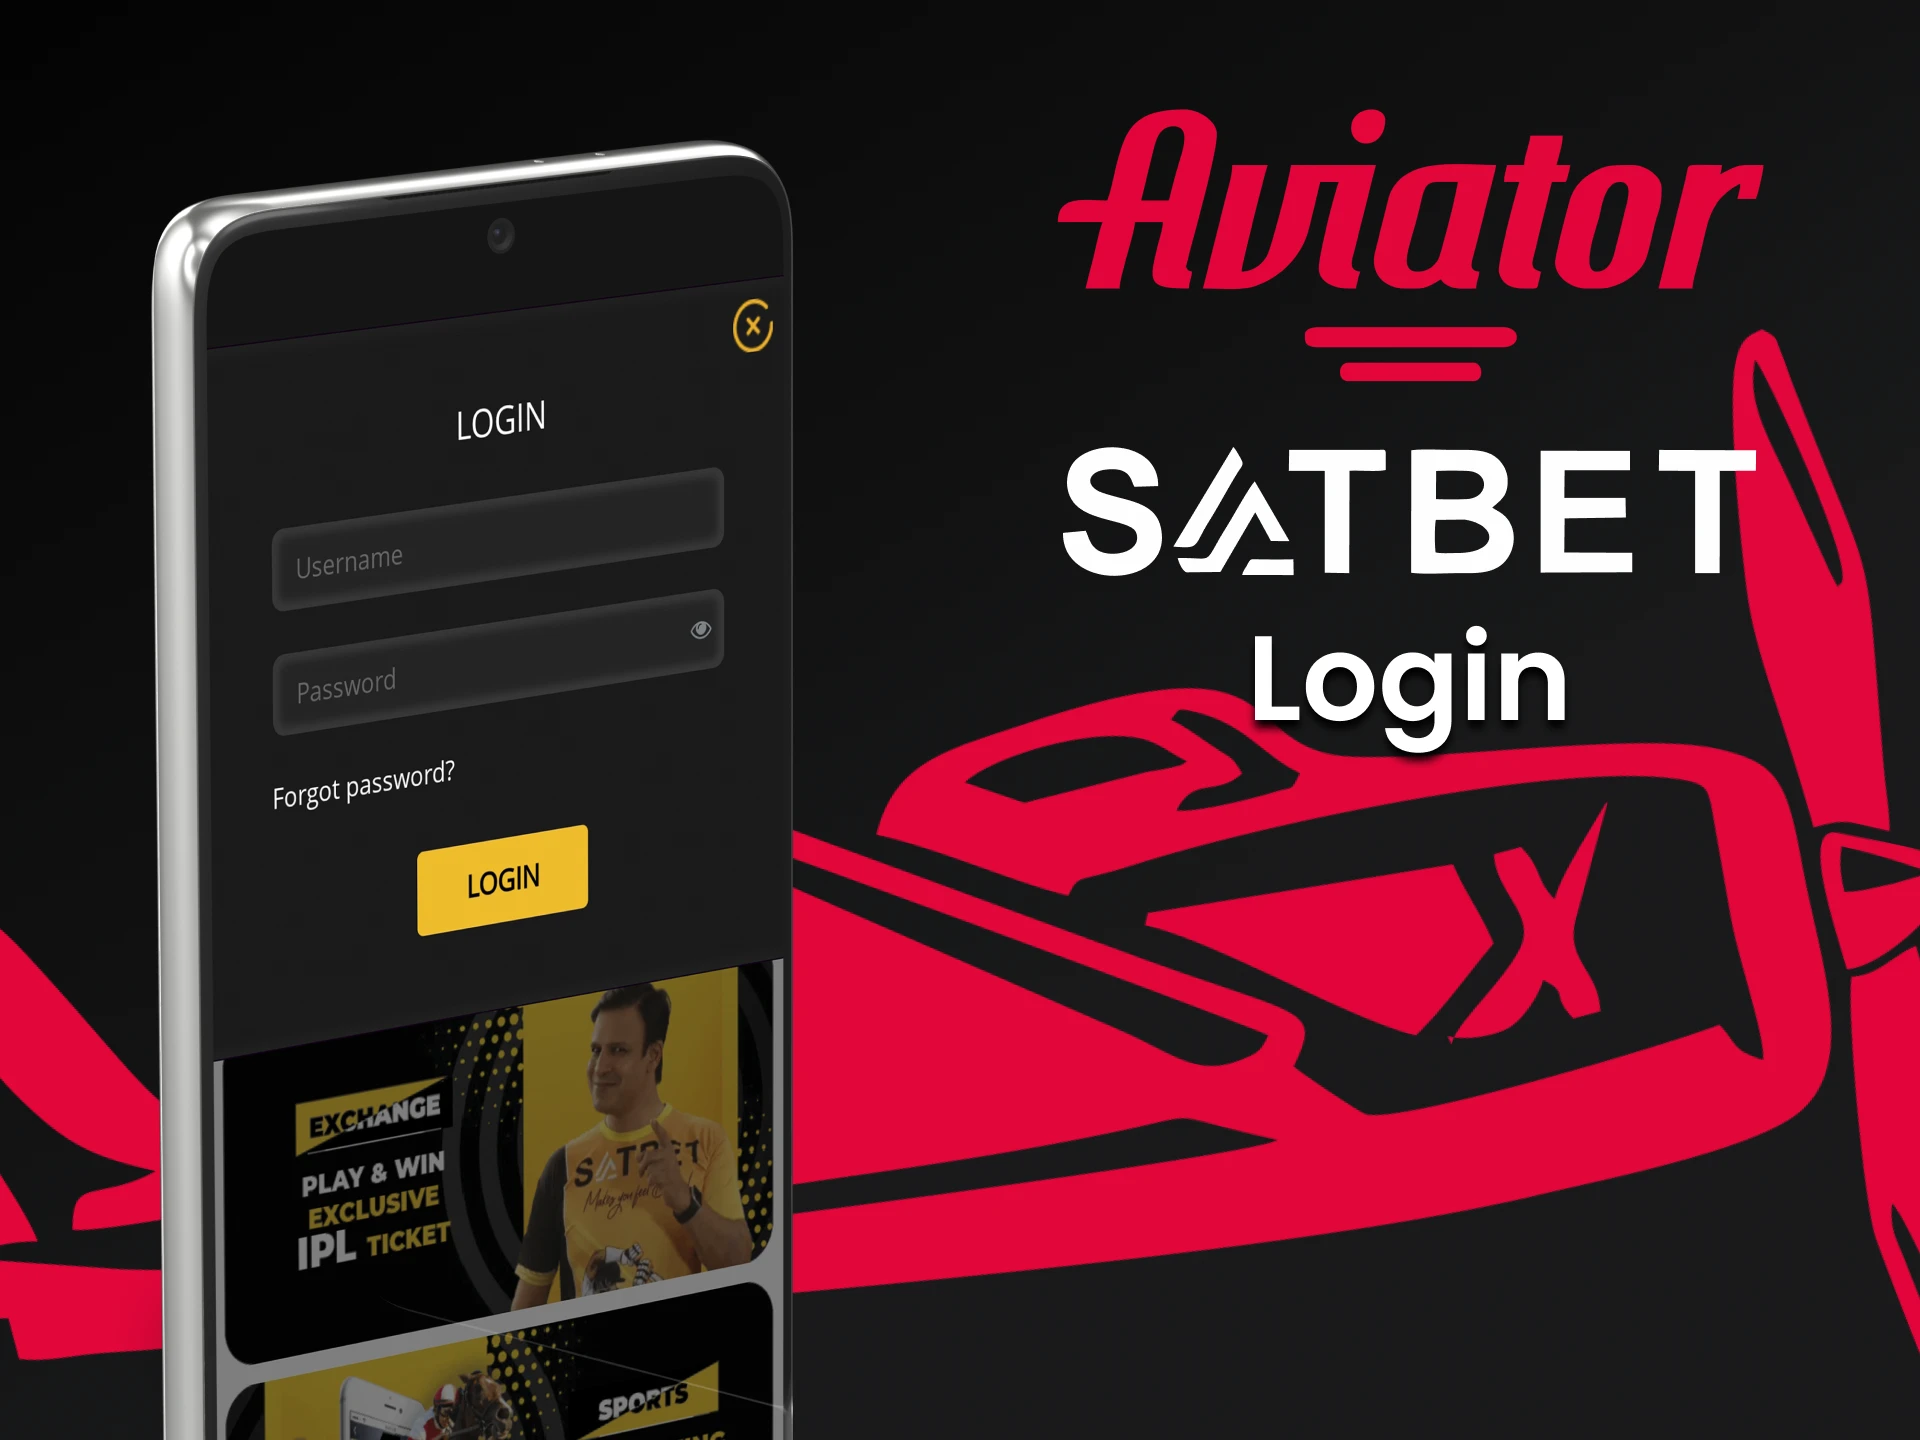 Log in to your personal account through the Satbet app.